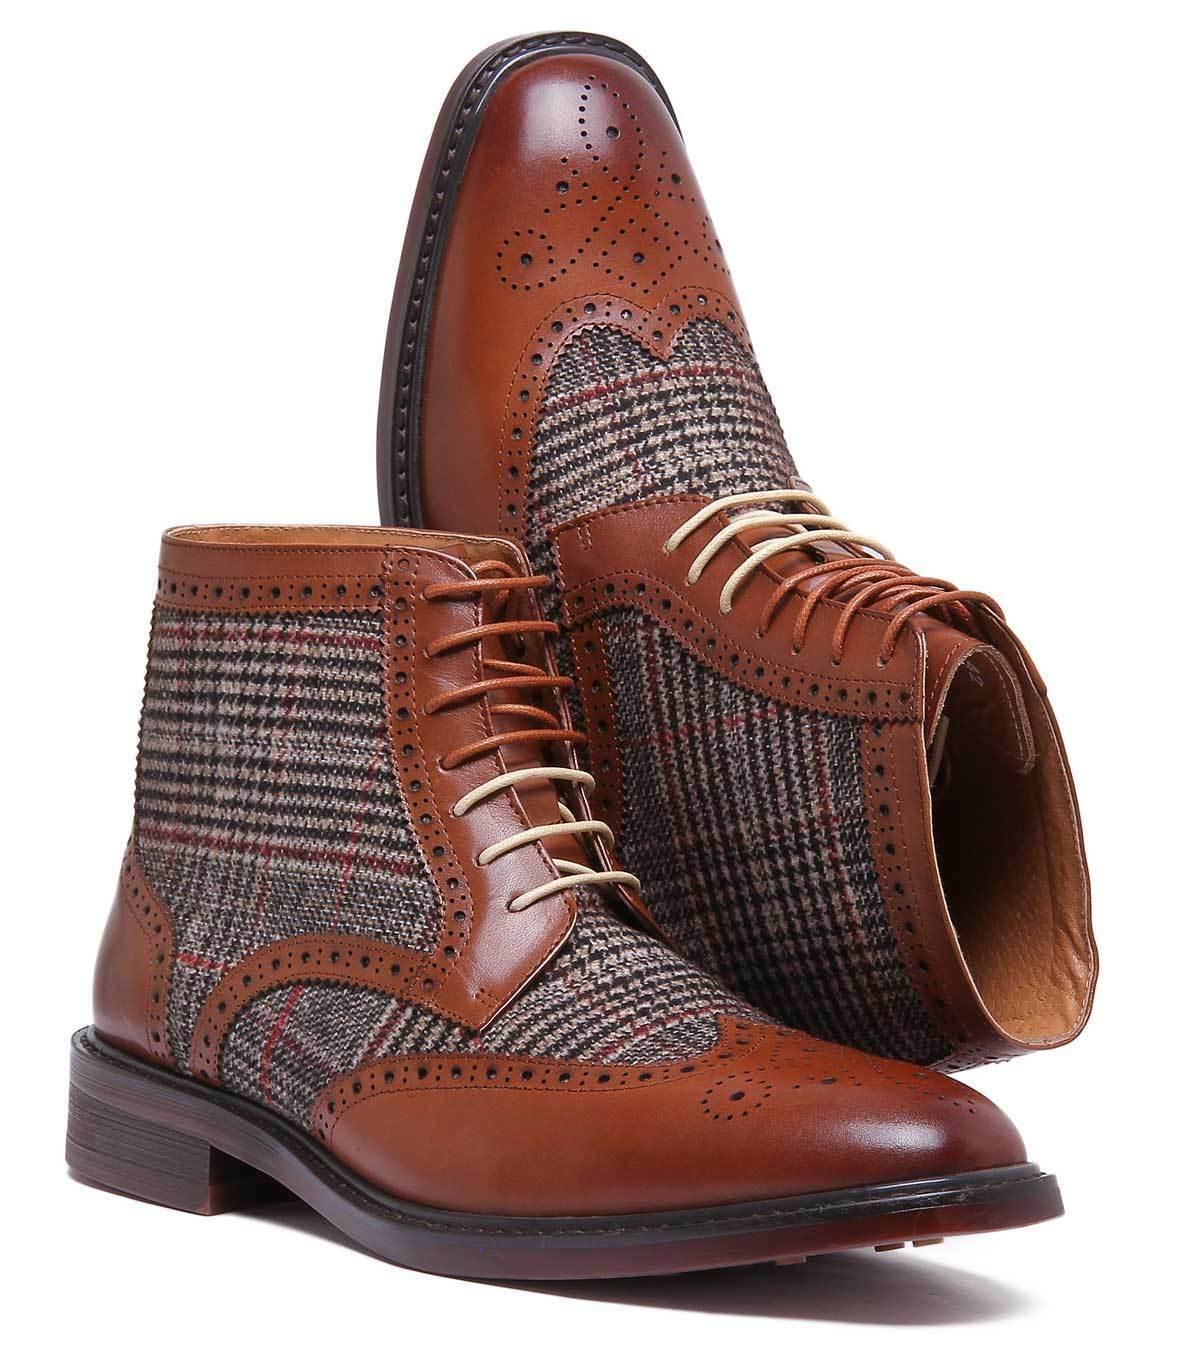 Justin Rees Alvin Boots Brown Leather/Tweed Boots